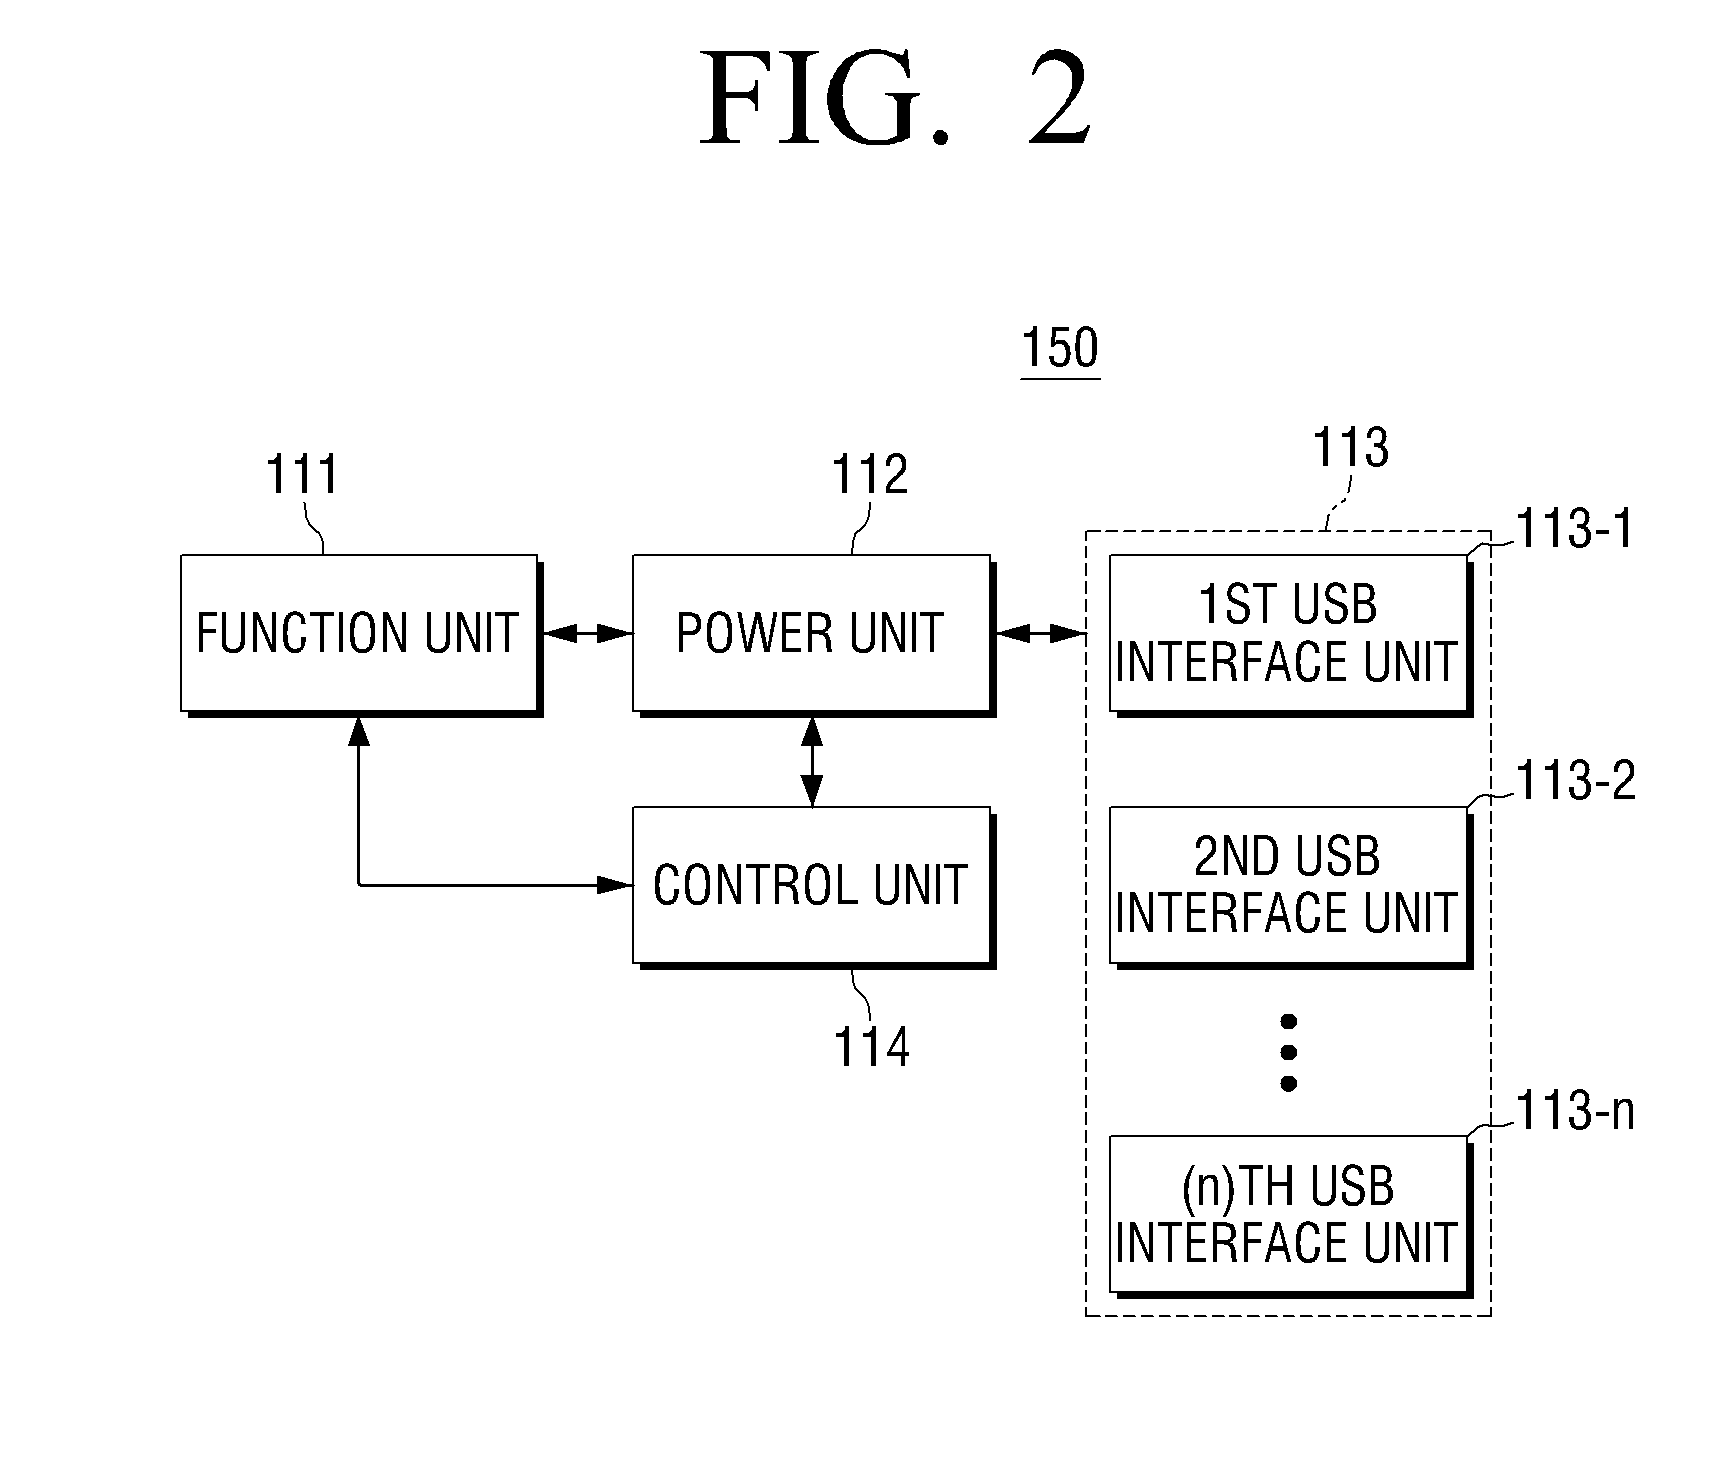 Three dimensional (3D) glasses, 3D display apparatus and system for charging 3D glasses